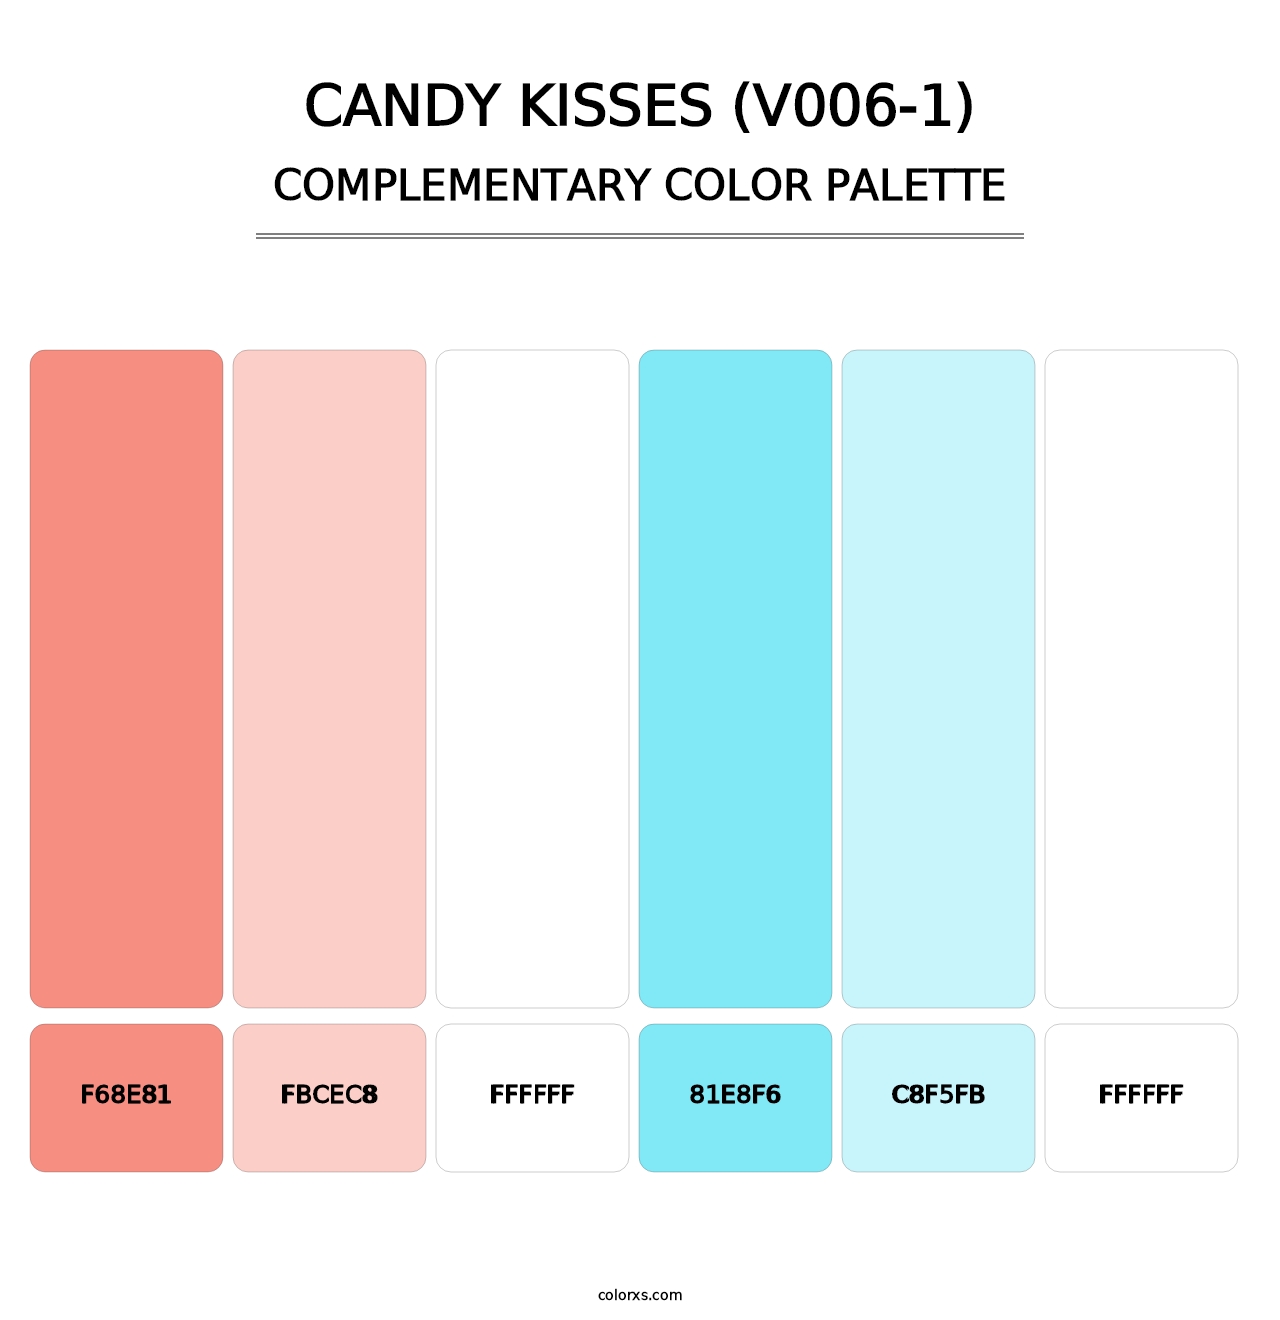 Candy Kisses (V006-1) - Complementary Color Palette